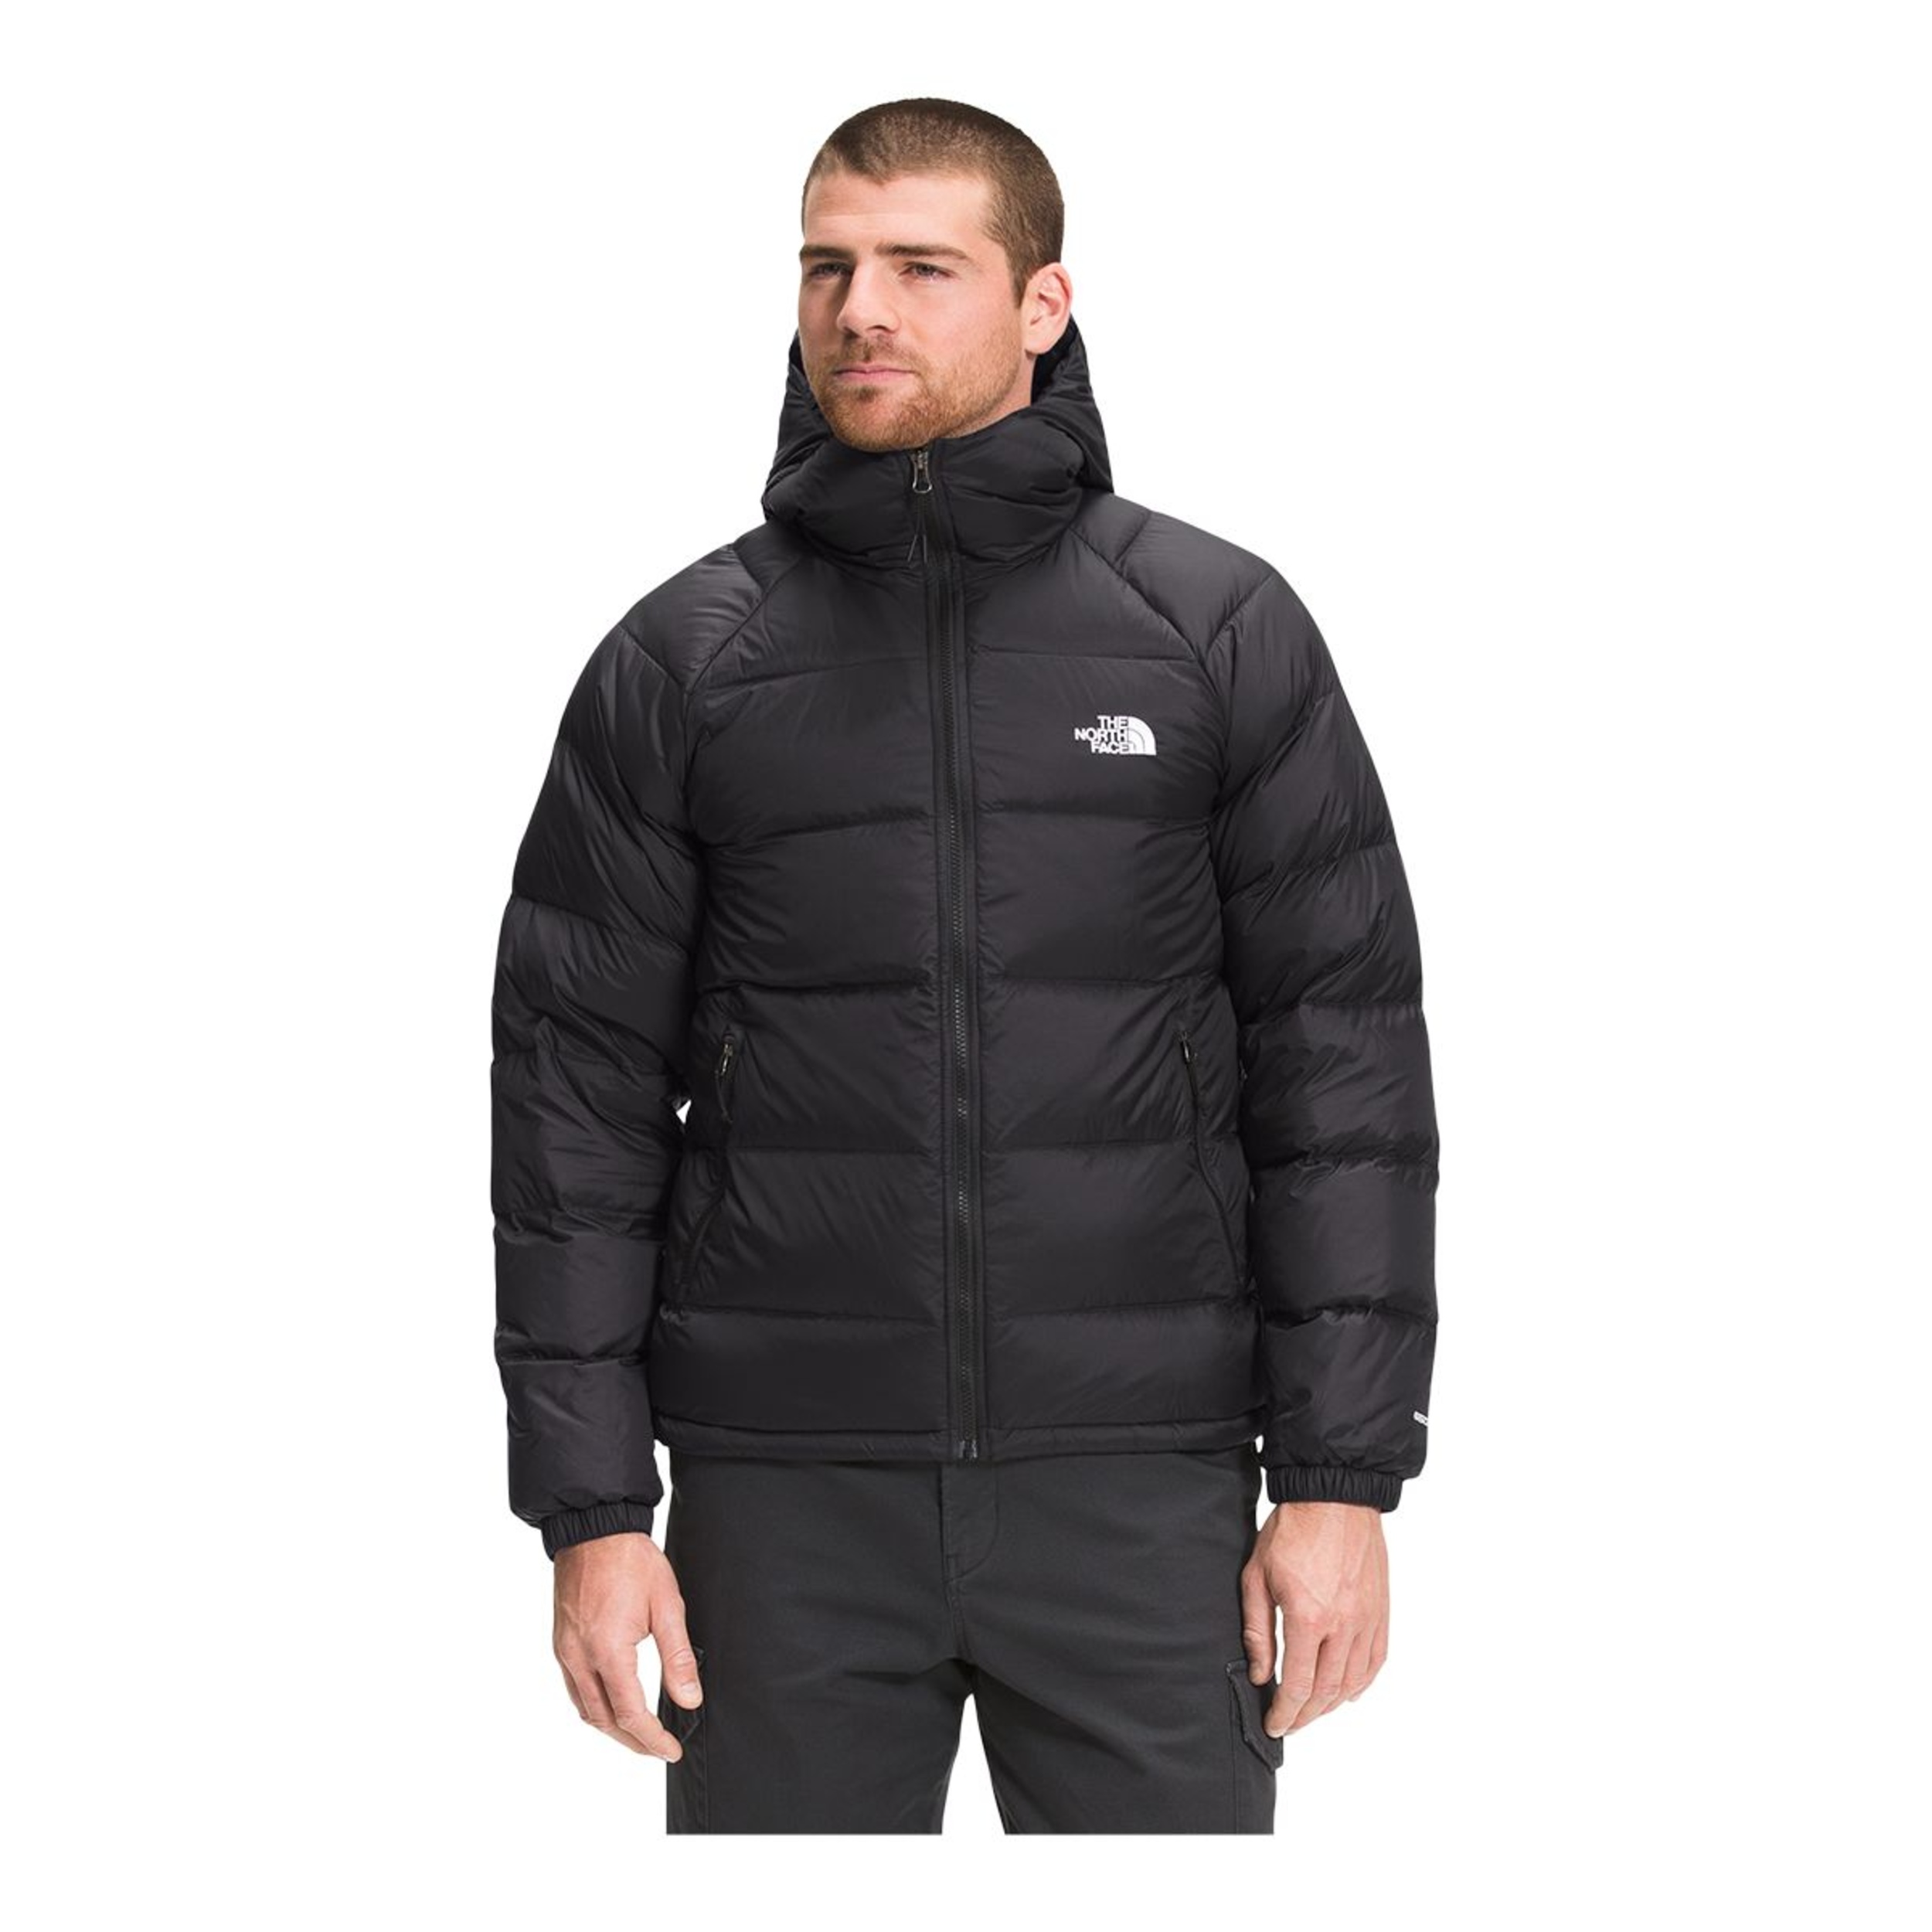 The North Face Men's Hydrenalite Down Jacket | Atmosphere